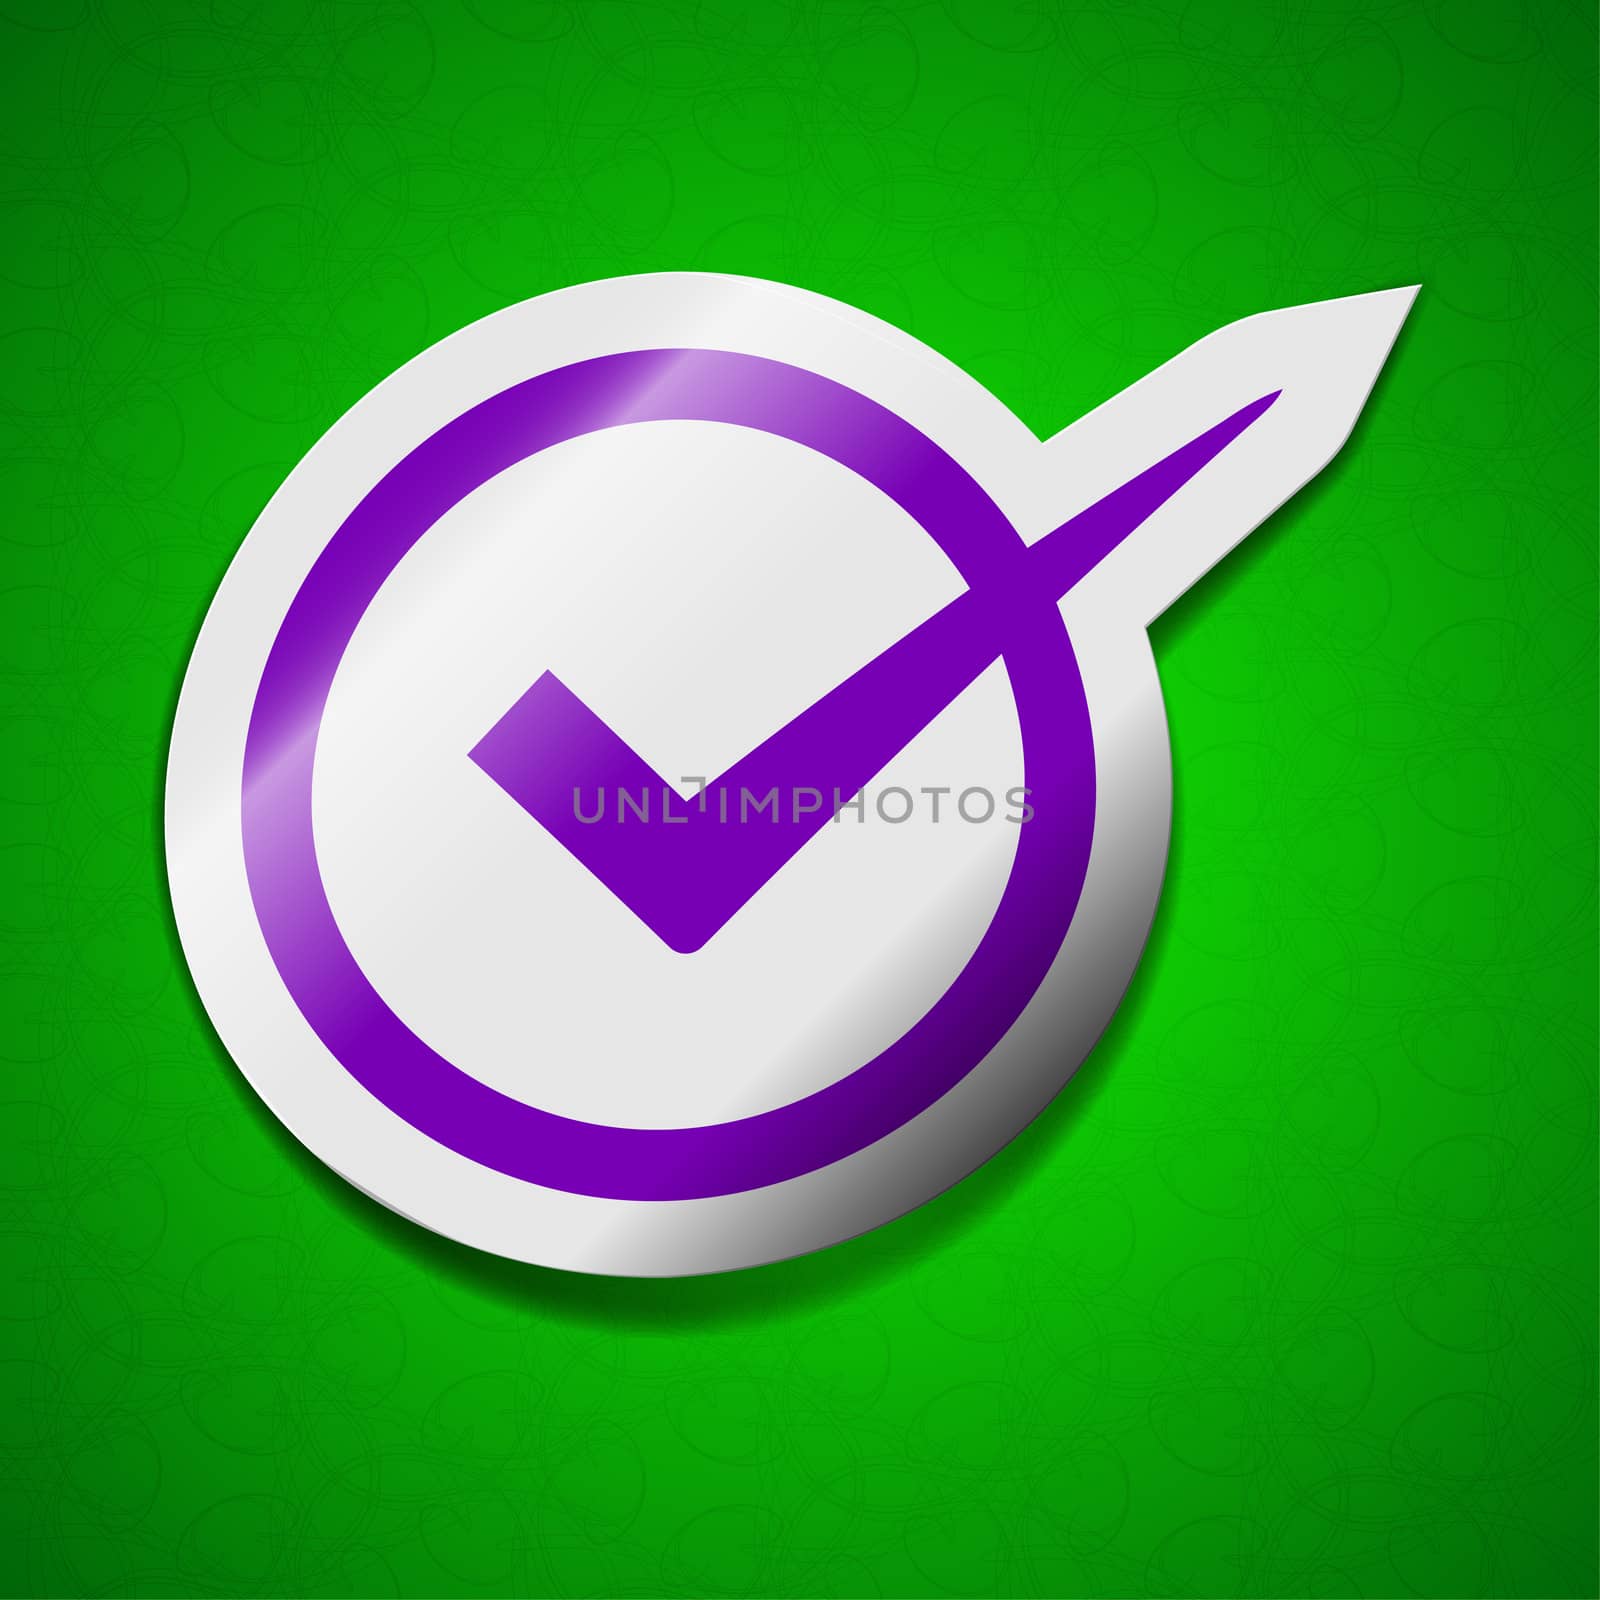 Check mark icon sign. Symbol chic colored sticky label on green background.  illustration